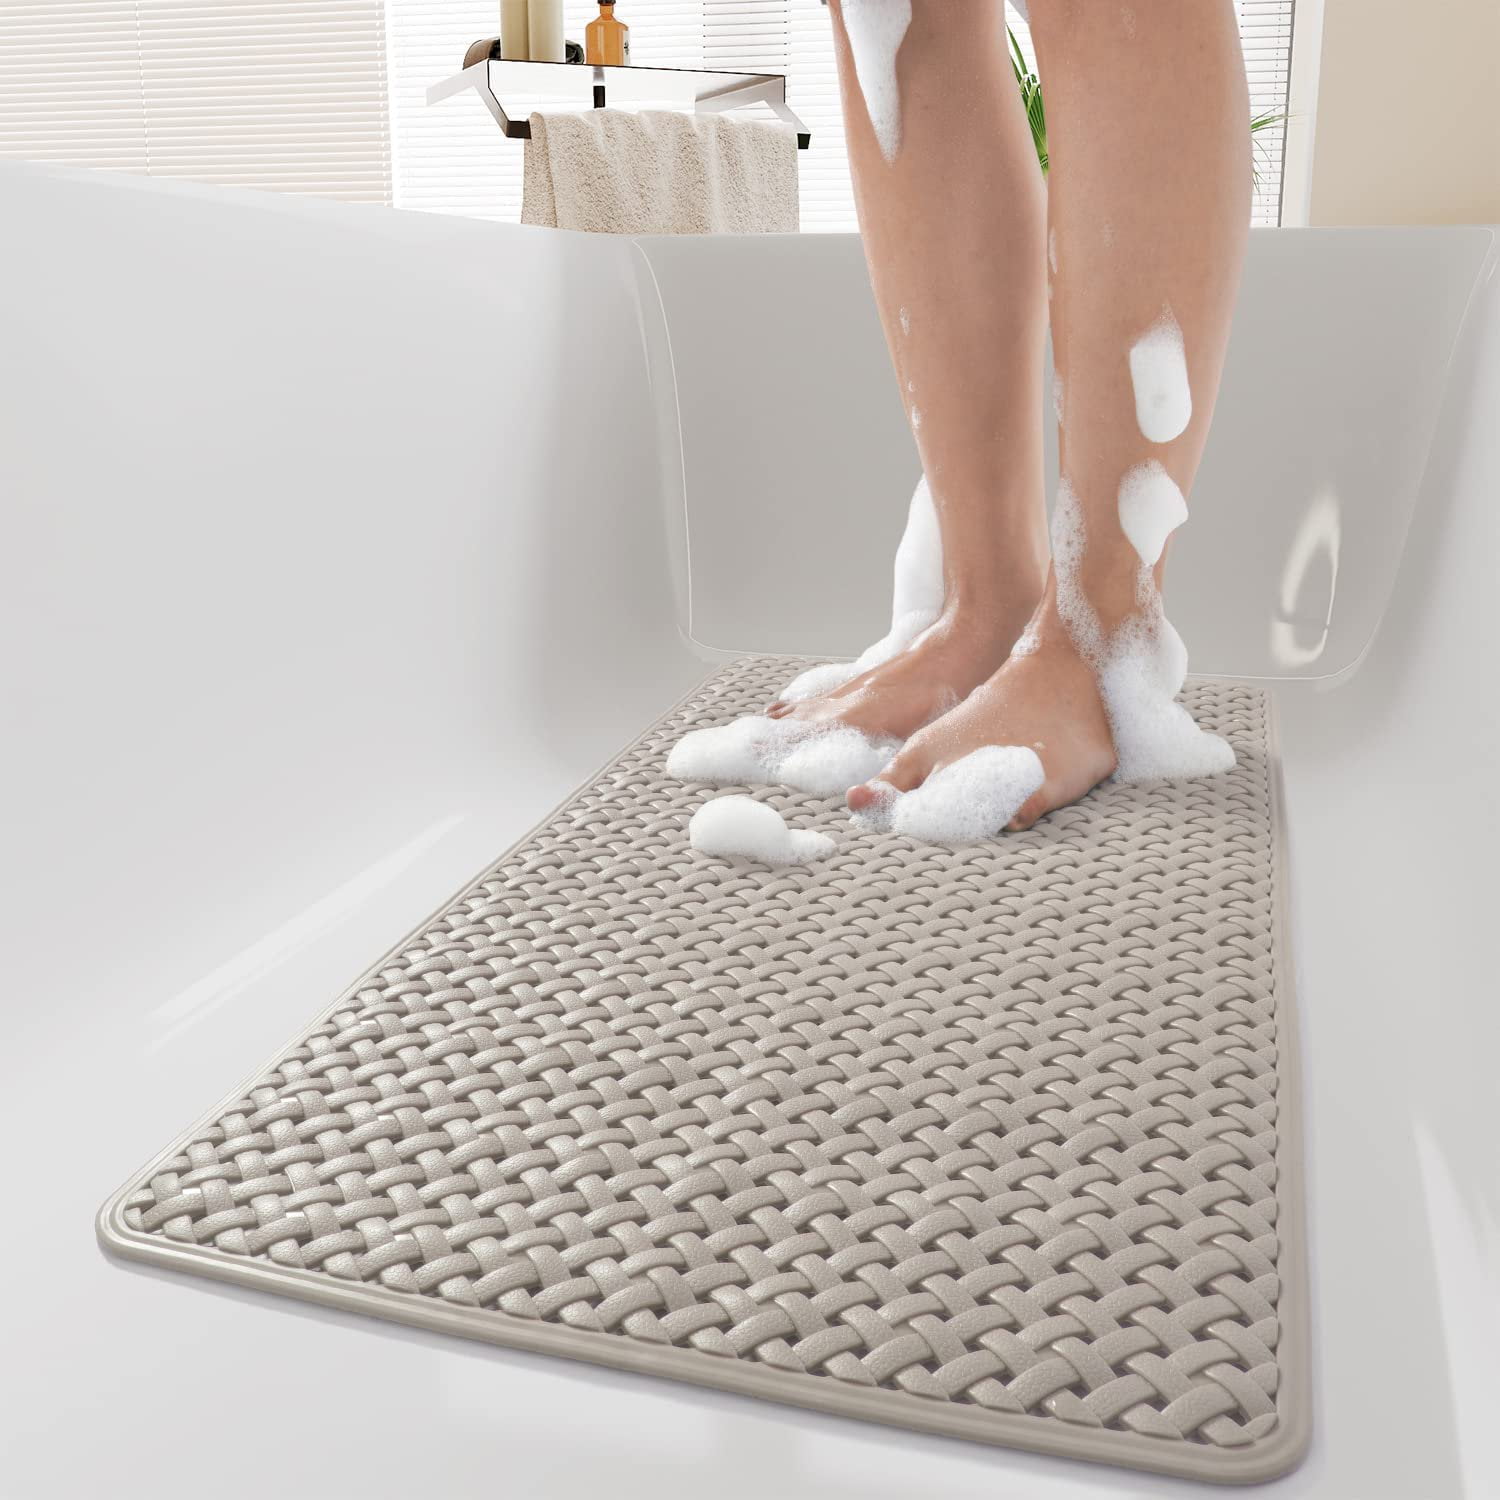 Shower Mats for Inside Shower 23.62x35.43”,PVC Material Bathtub Mats,with  Strong Suction Cups,Machine Washable,Soft Touch for Shower Stall